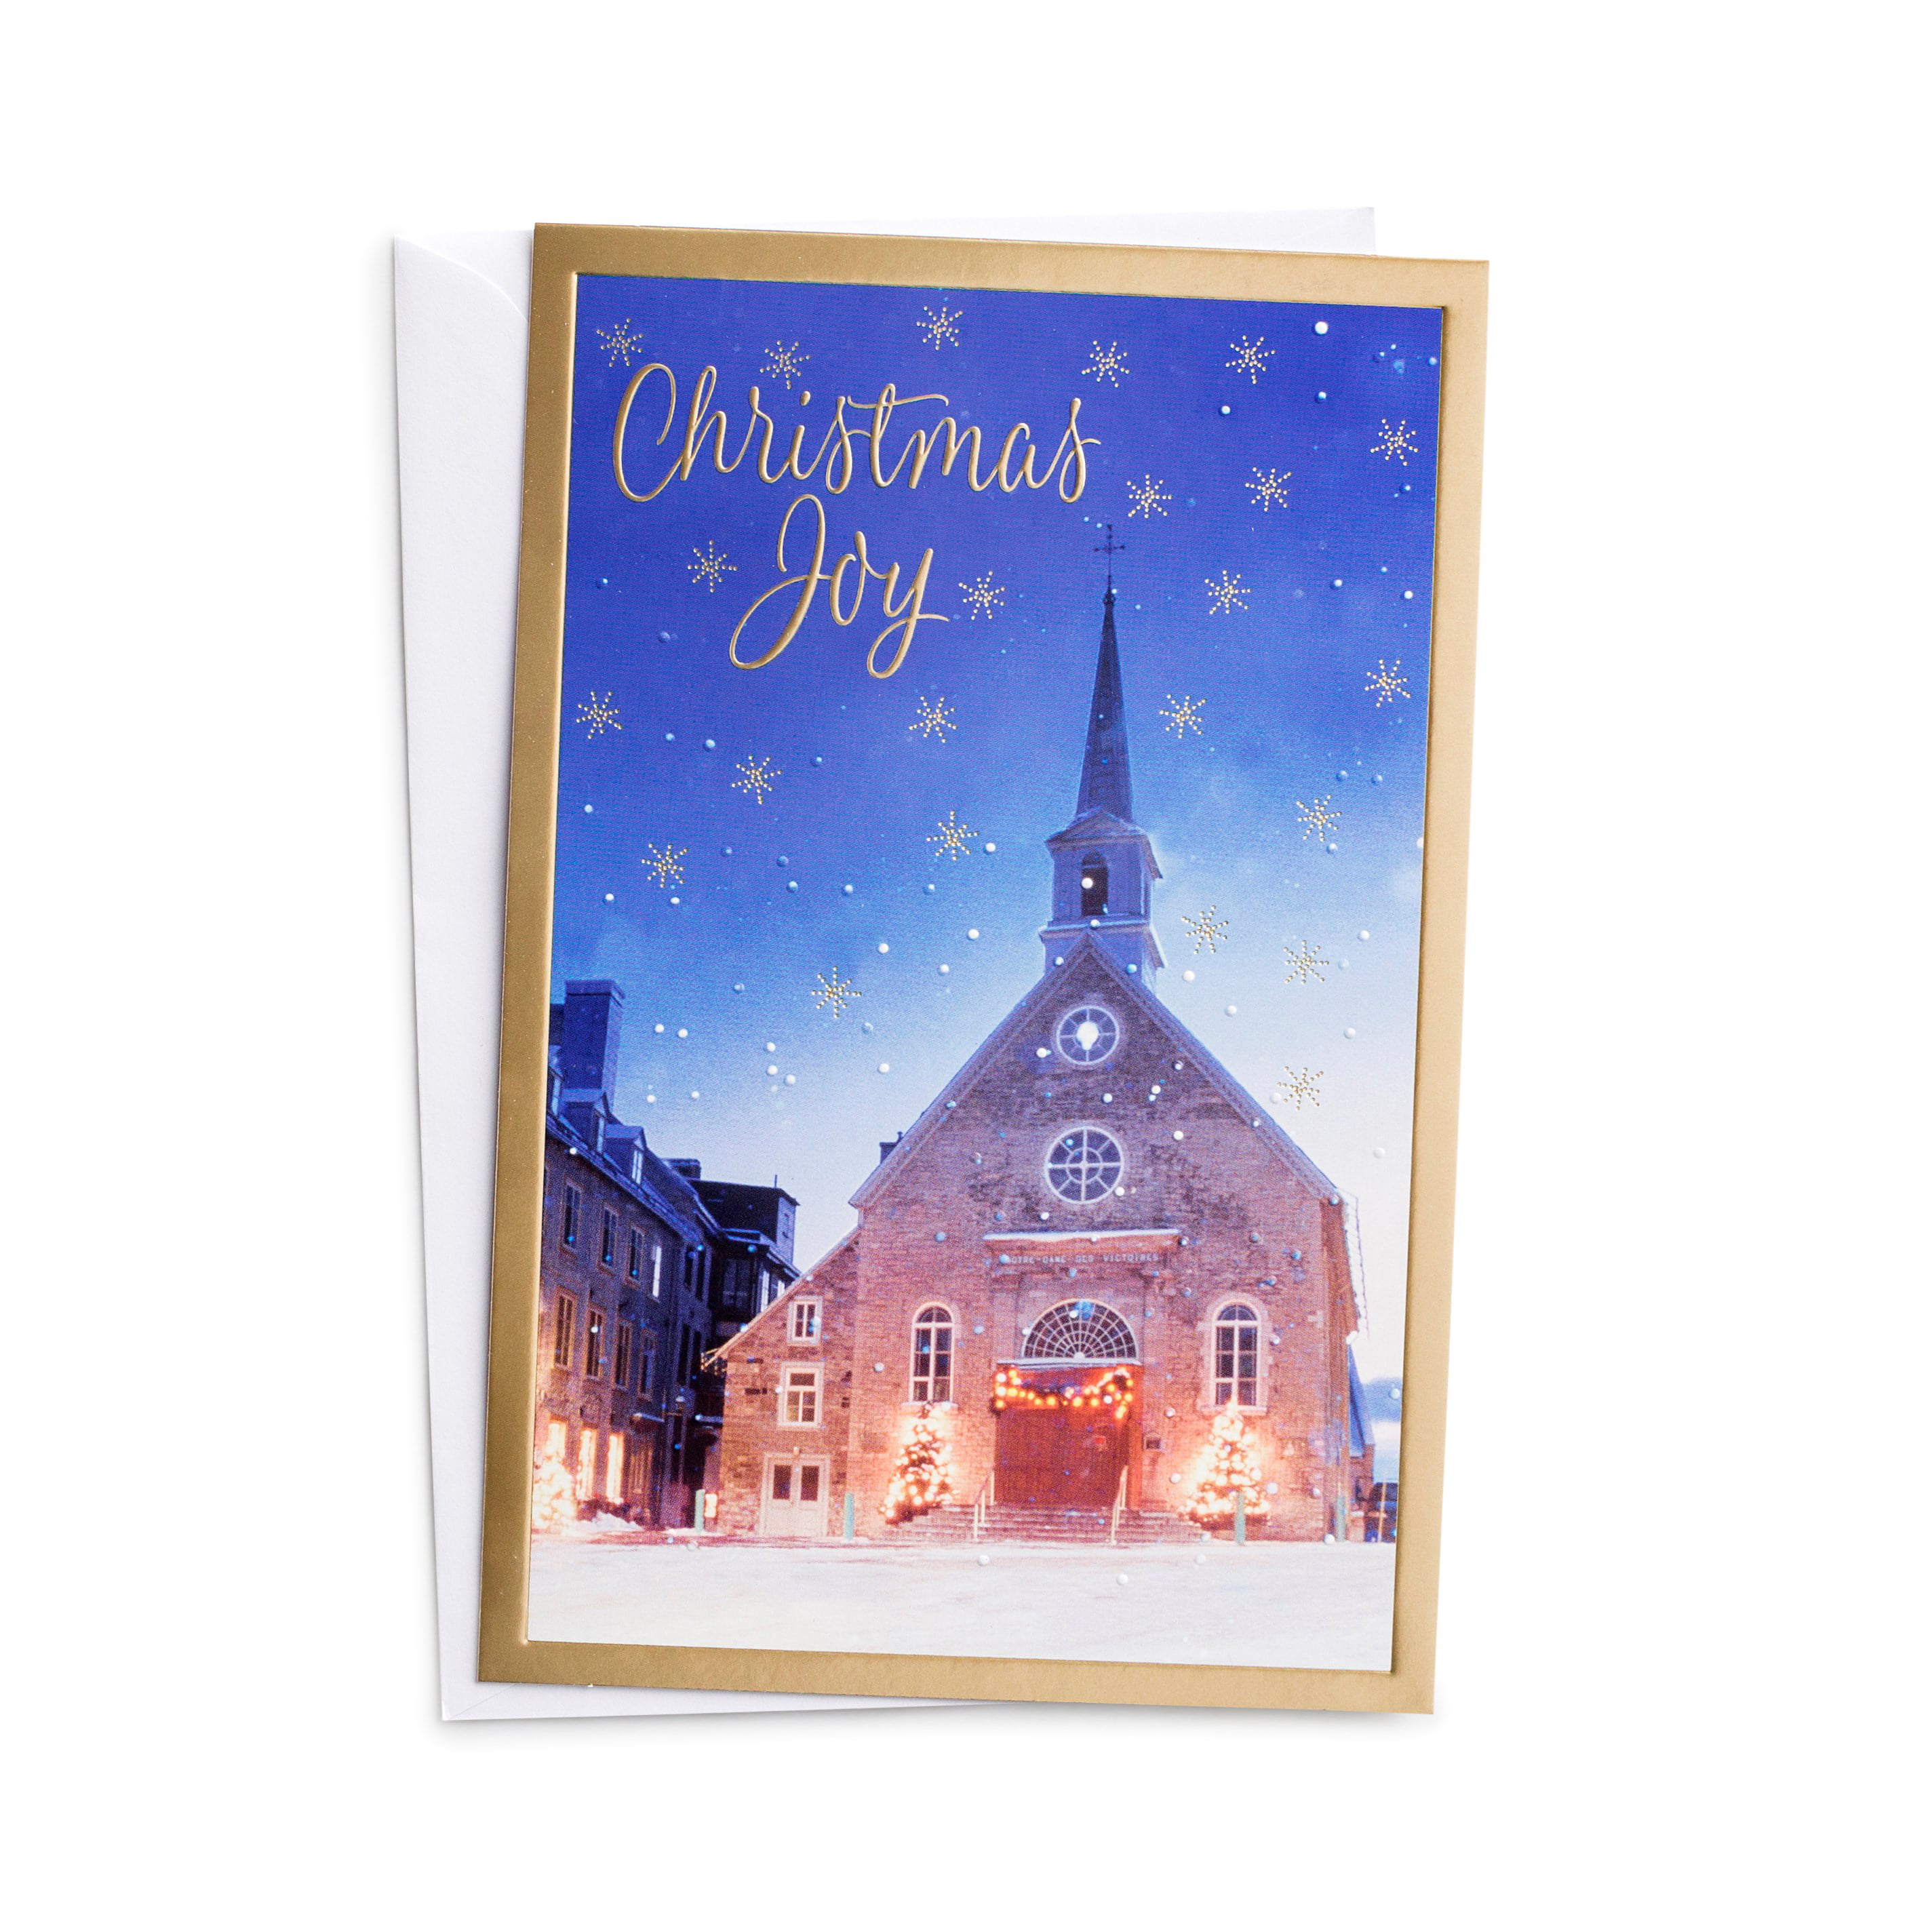 Christian Christmas cards 10 Christmas cards in pack by Just Cards Direct Worship Him with Bible verse Psalm 95:6 inside these foiled religious Christmas cards